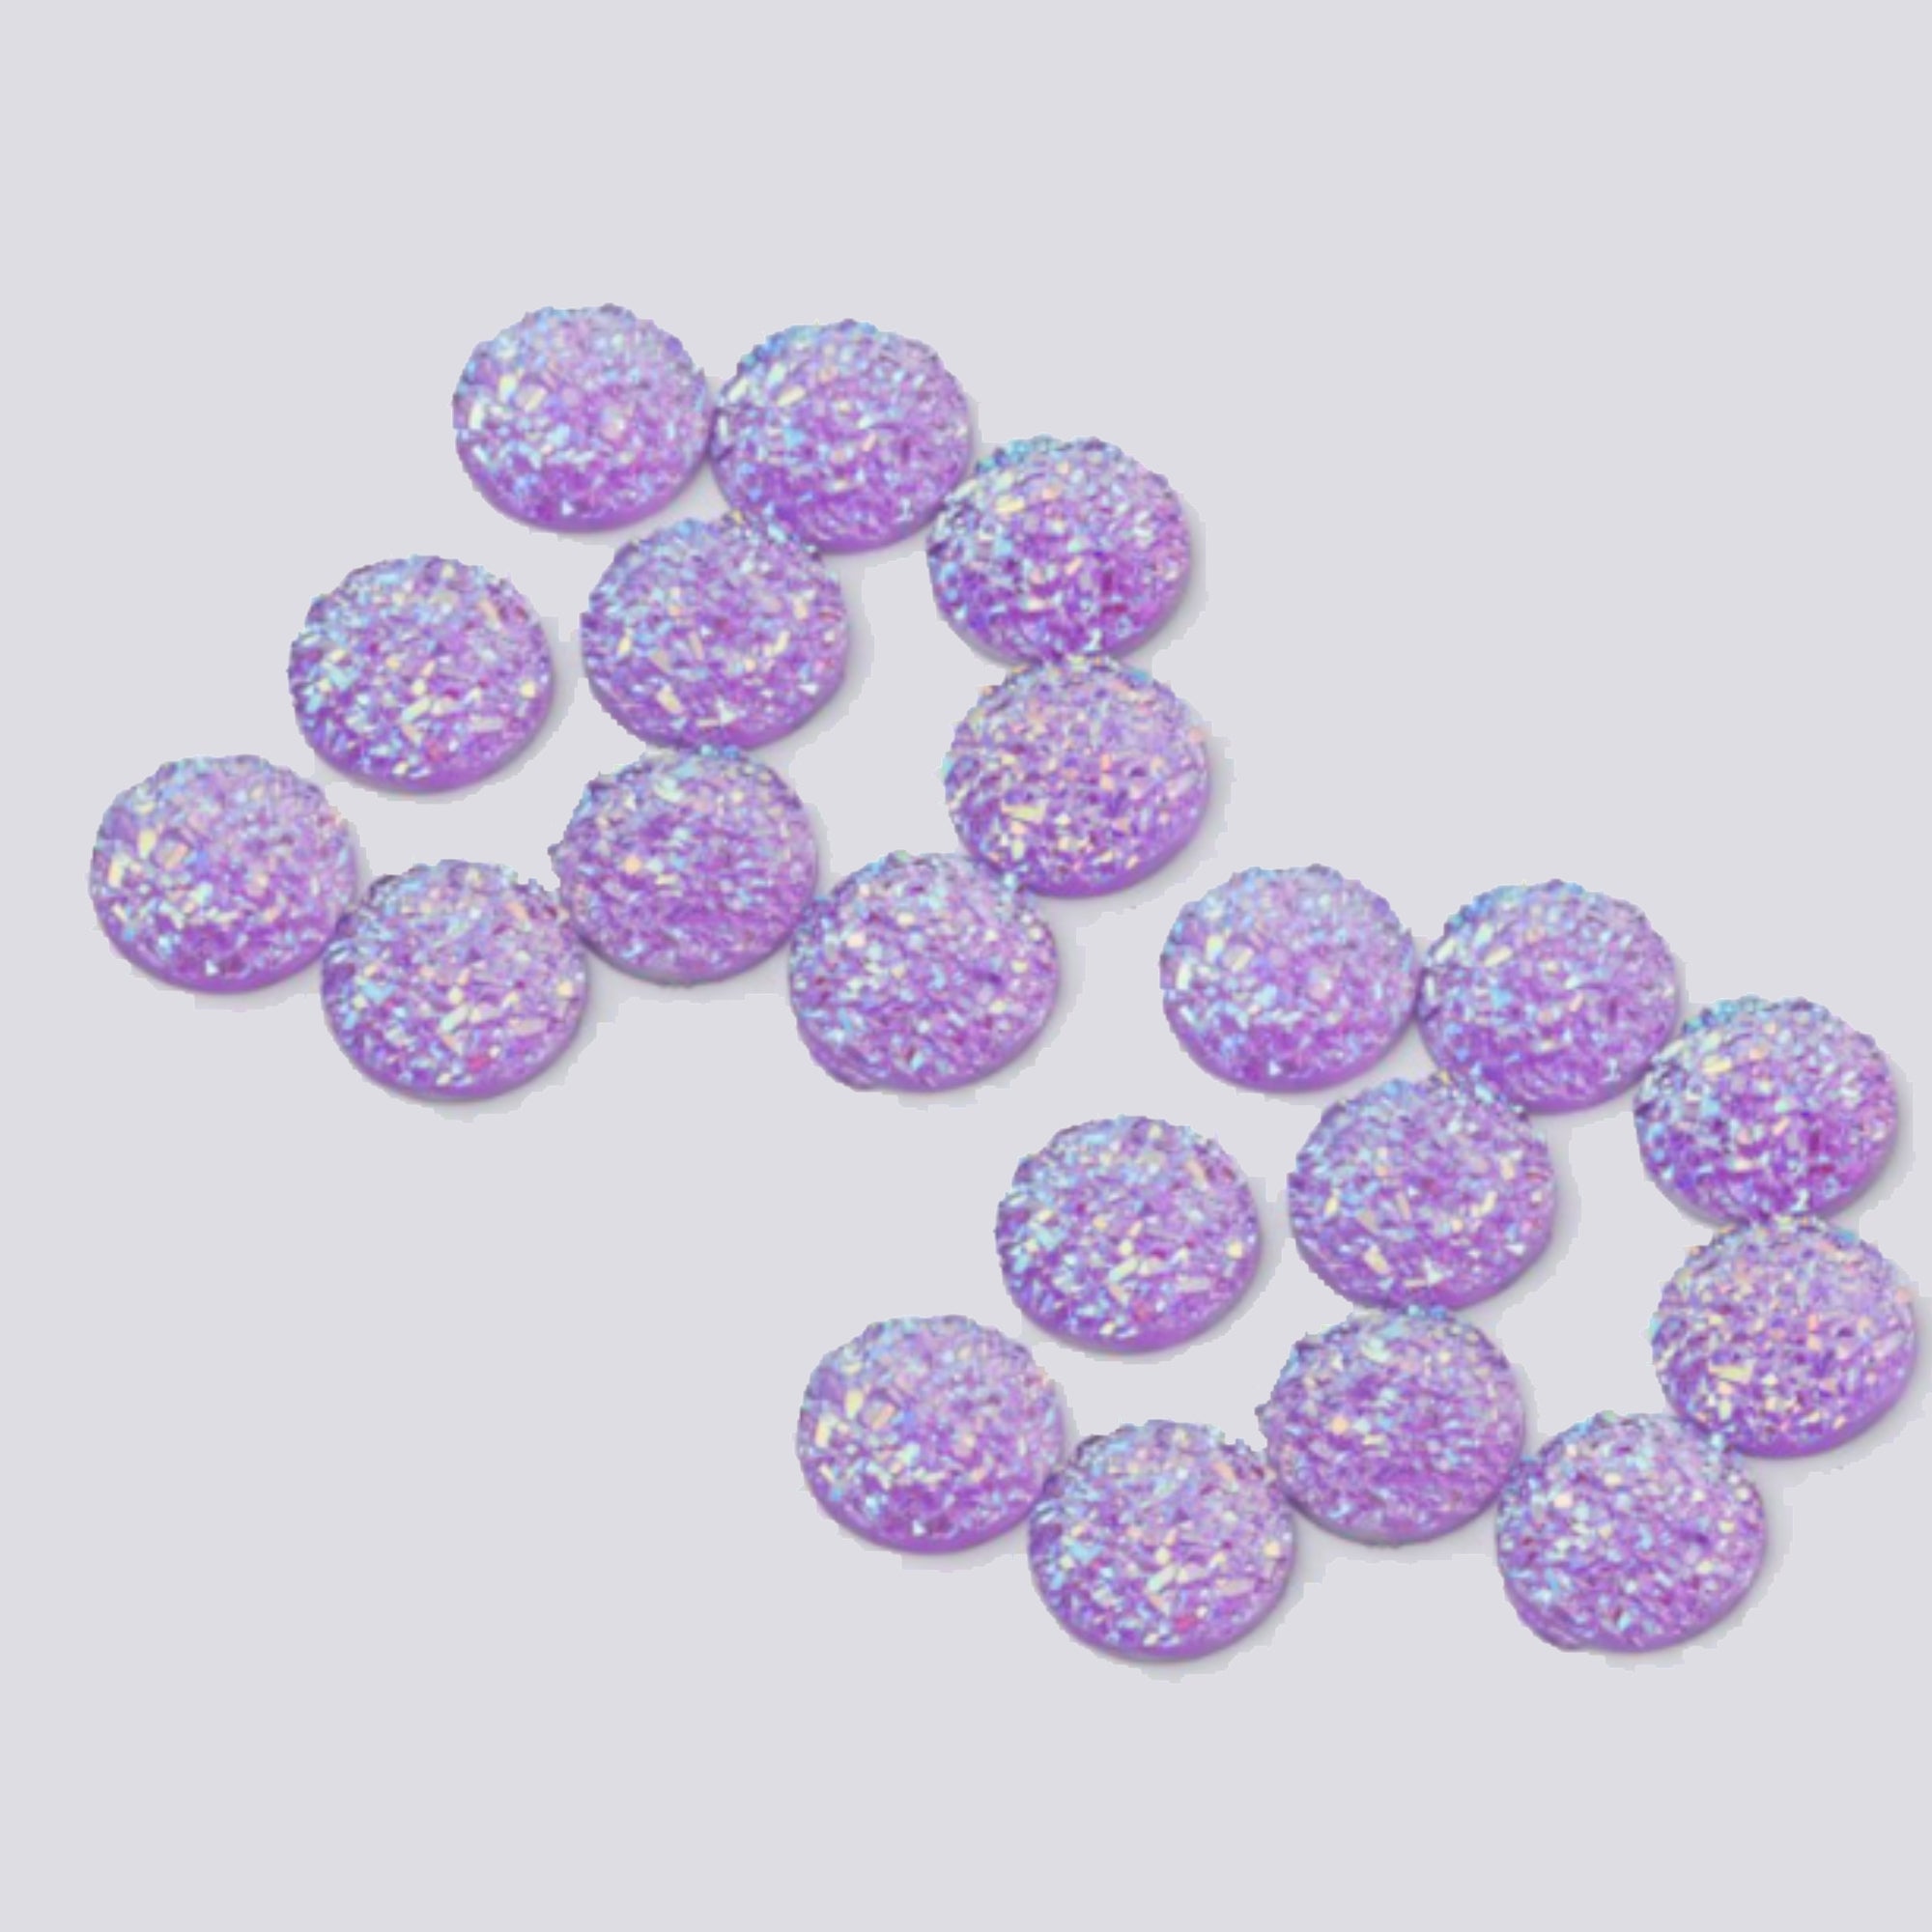 Bling It Up Collection 3/8" Lavender Chunky Round Bling - Pkg. of 20